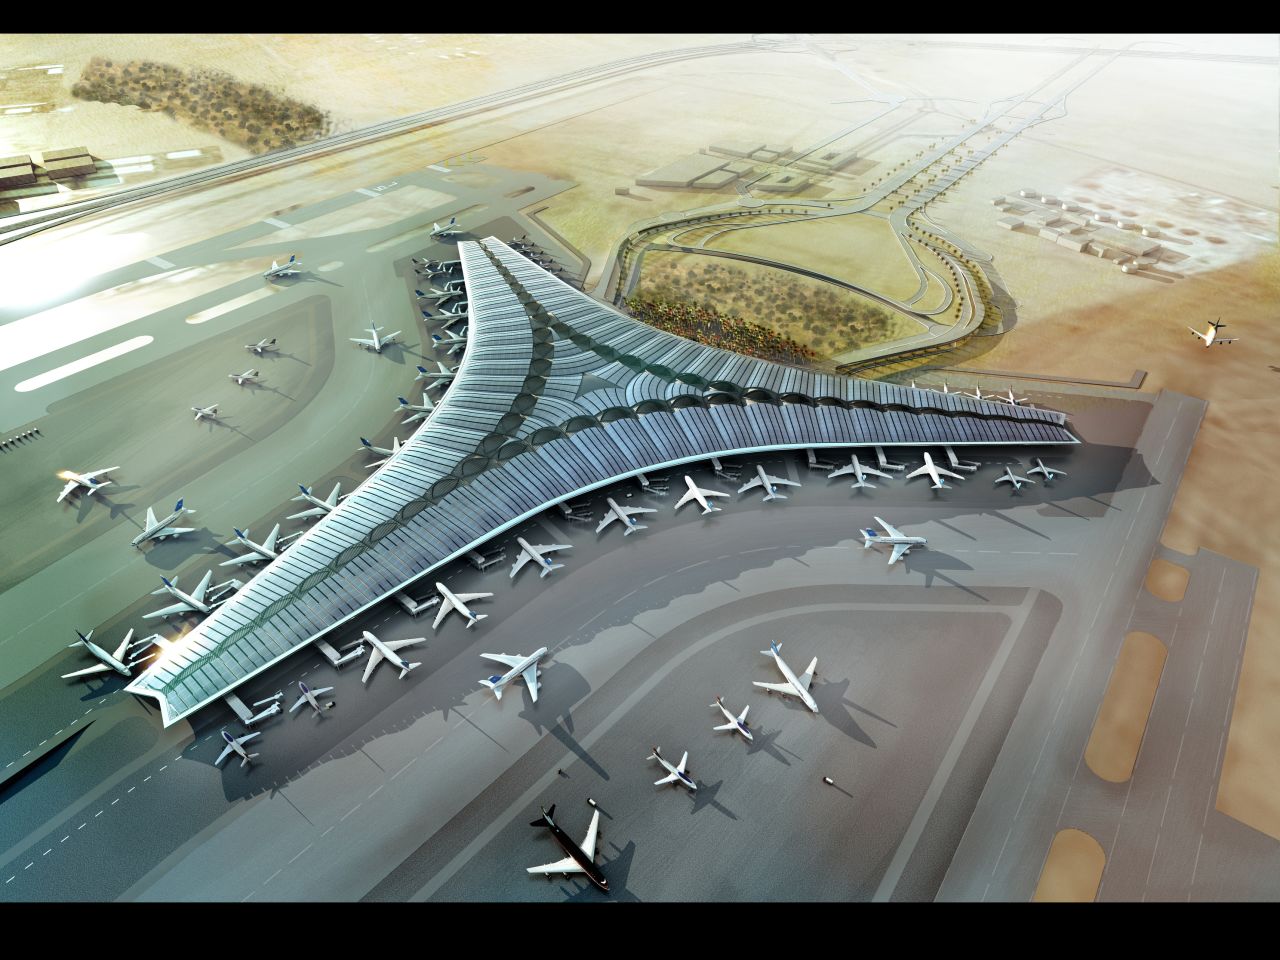 This artist's impression shows the trefoil shape of the new terminal at Kuwait International Airport. The three wings will have a roof that incorporates a large expanse of panels to harvest solar energy, according to architects, <a href="http://www.fosterandpartners.com/Practice/Default.aspx" target="_blank" target="_blank">Foster and Partners</a>. The $3.2 billion terminal will be ready in 2016, according to Kuwait's Ministry of Public Works. 